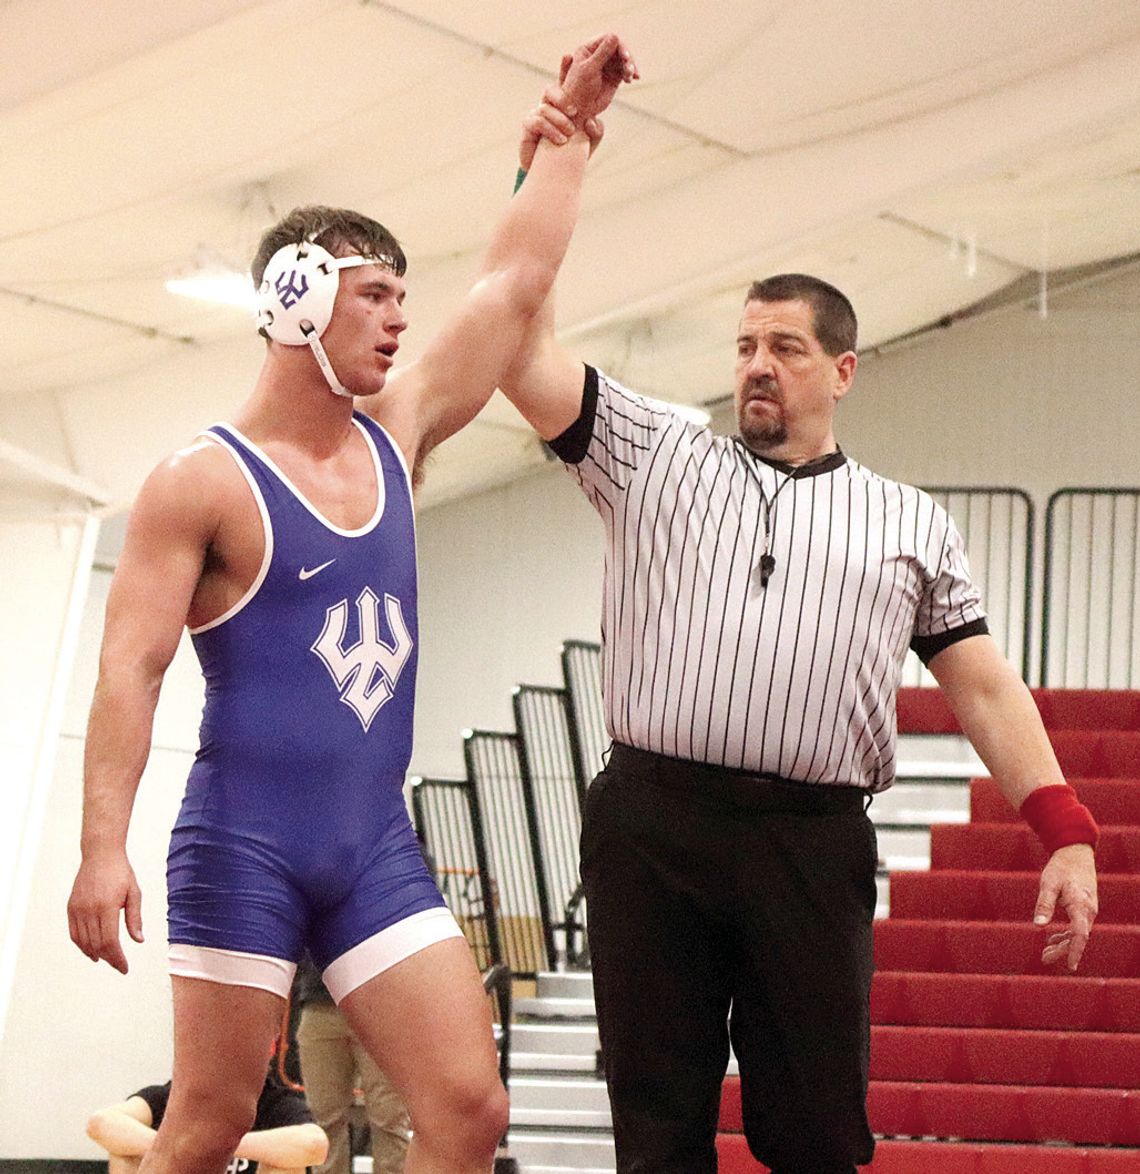 A Passion For W&L Wrestling